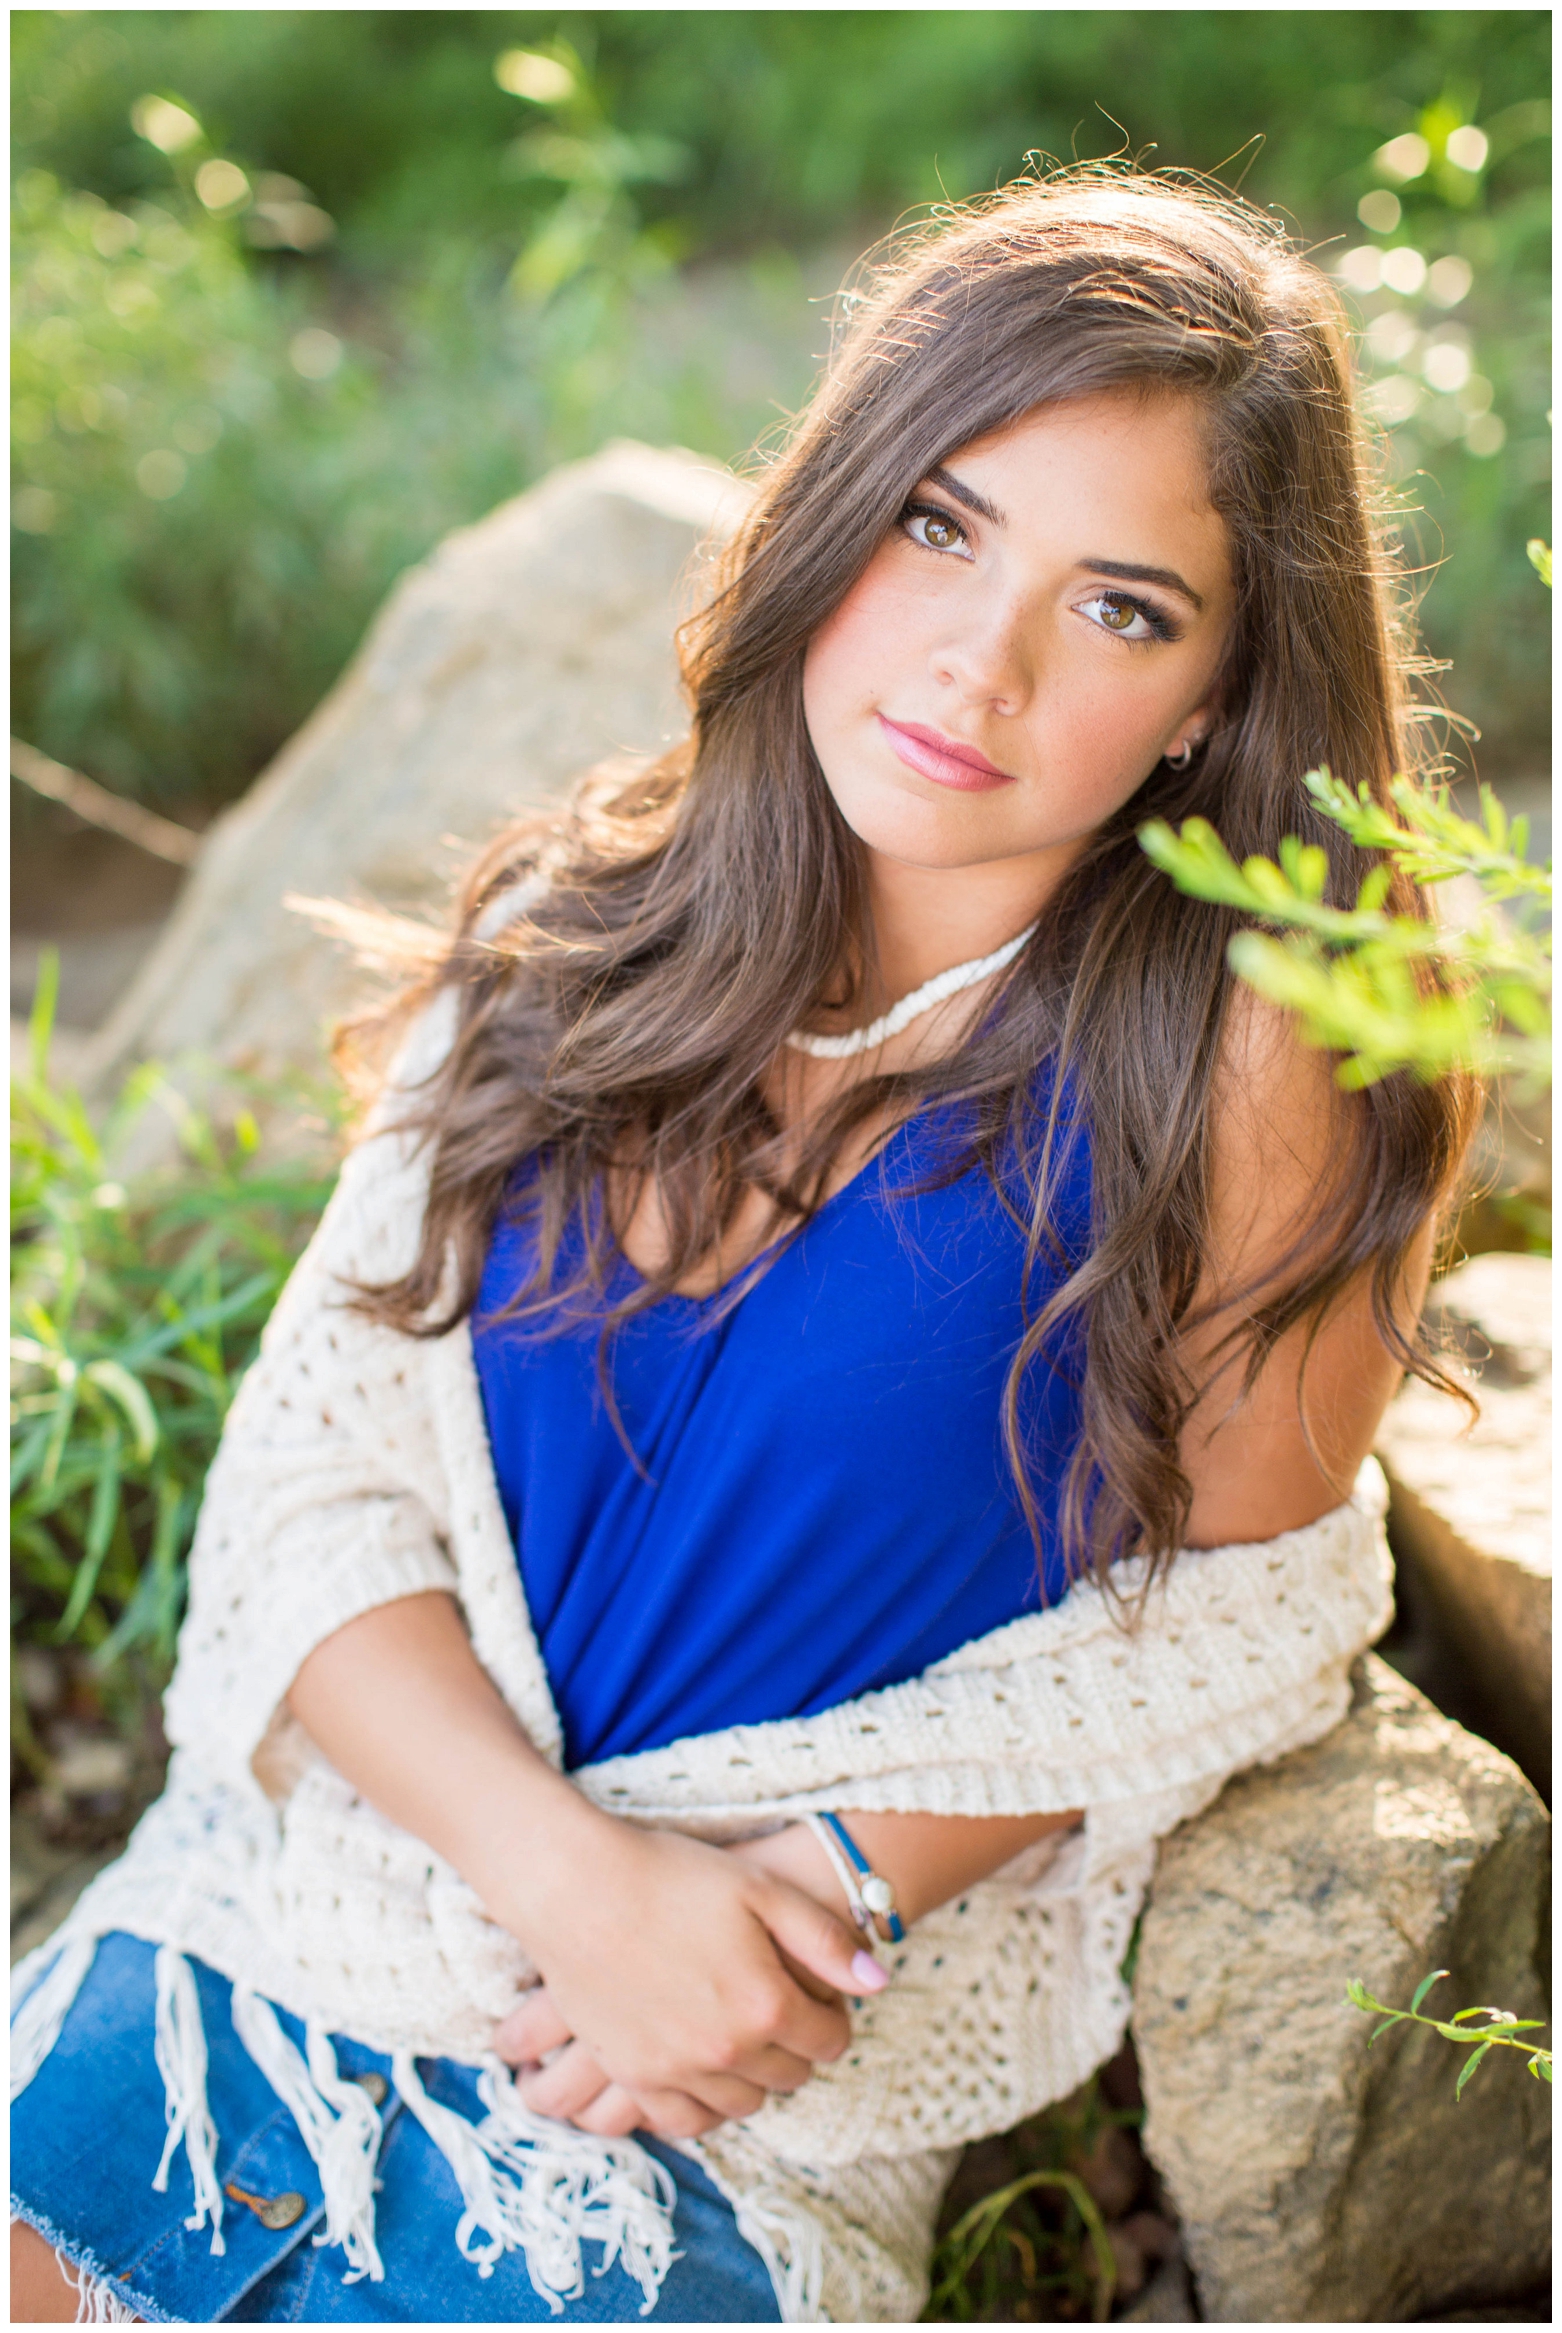 View More: http://hopetaylorphotographyphotos.pass.us/isabelle-senior-session